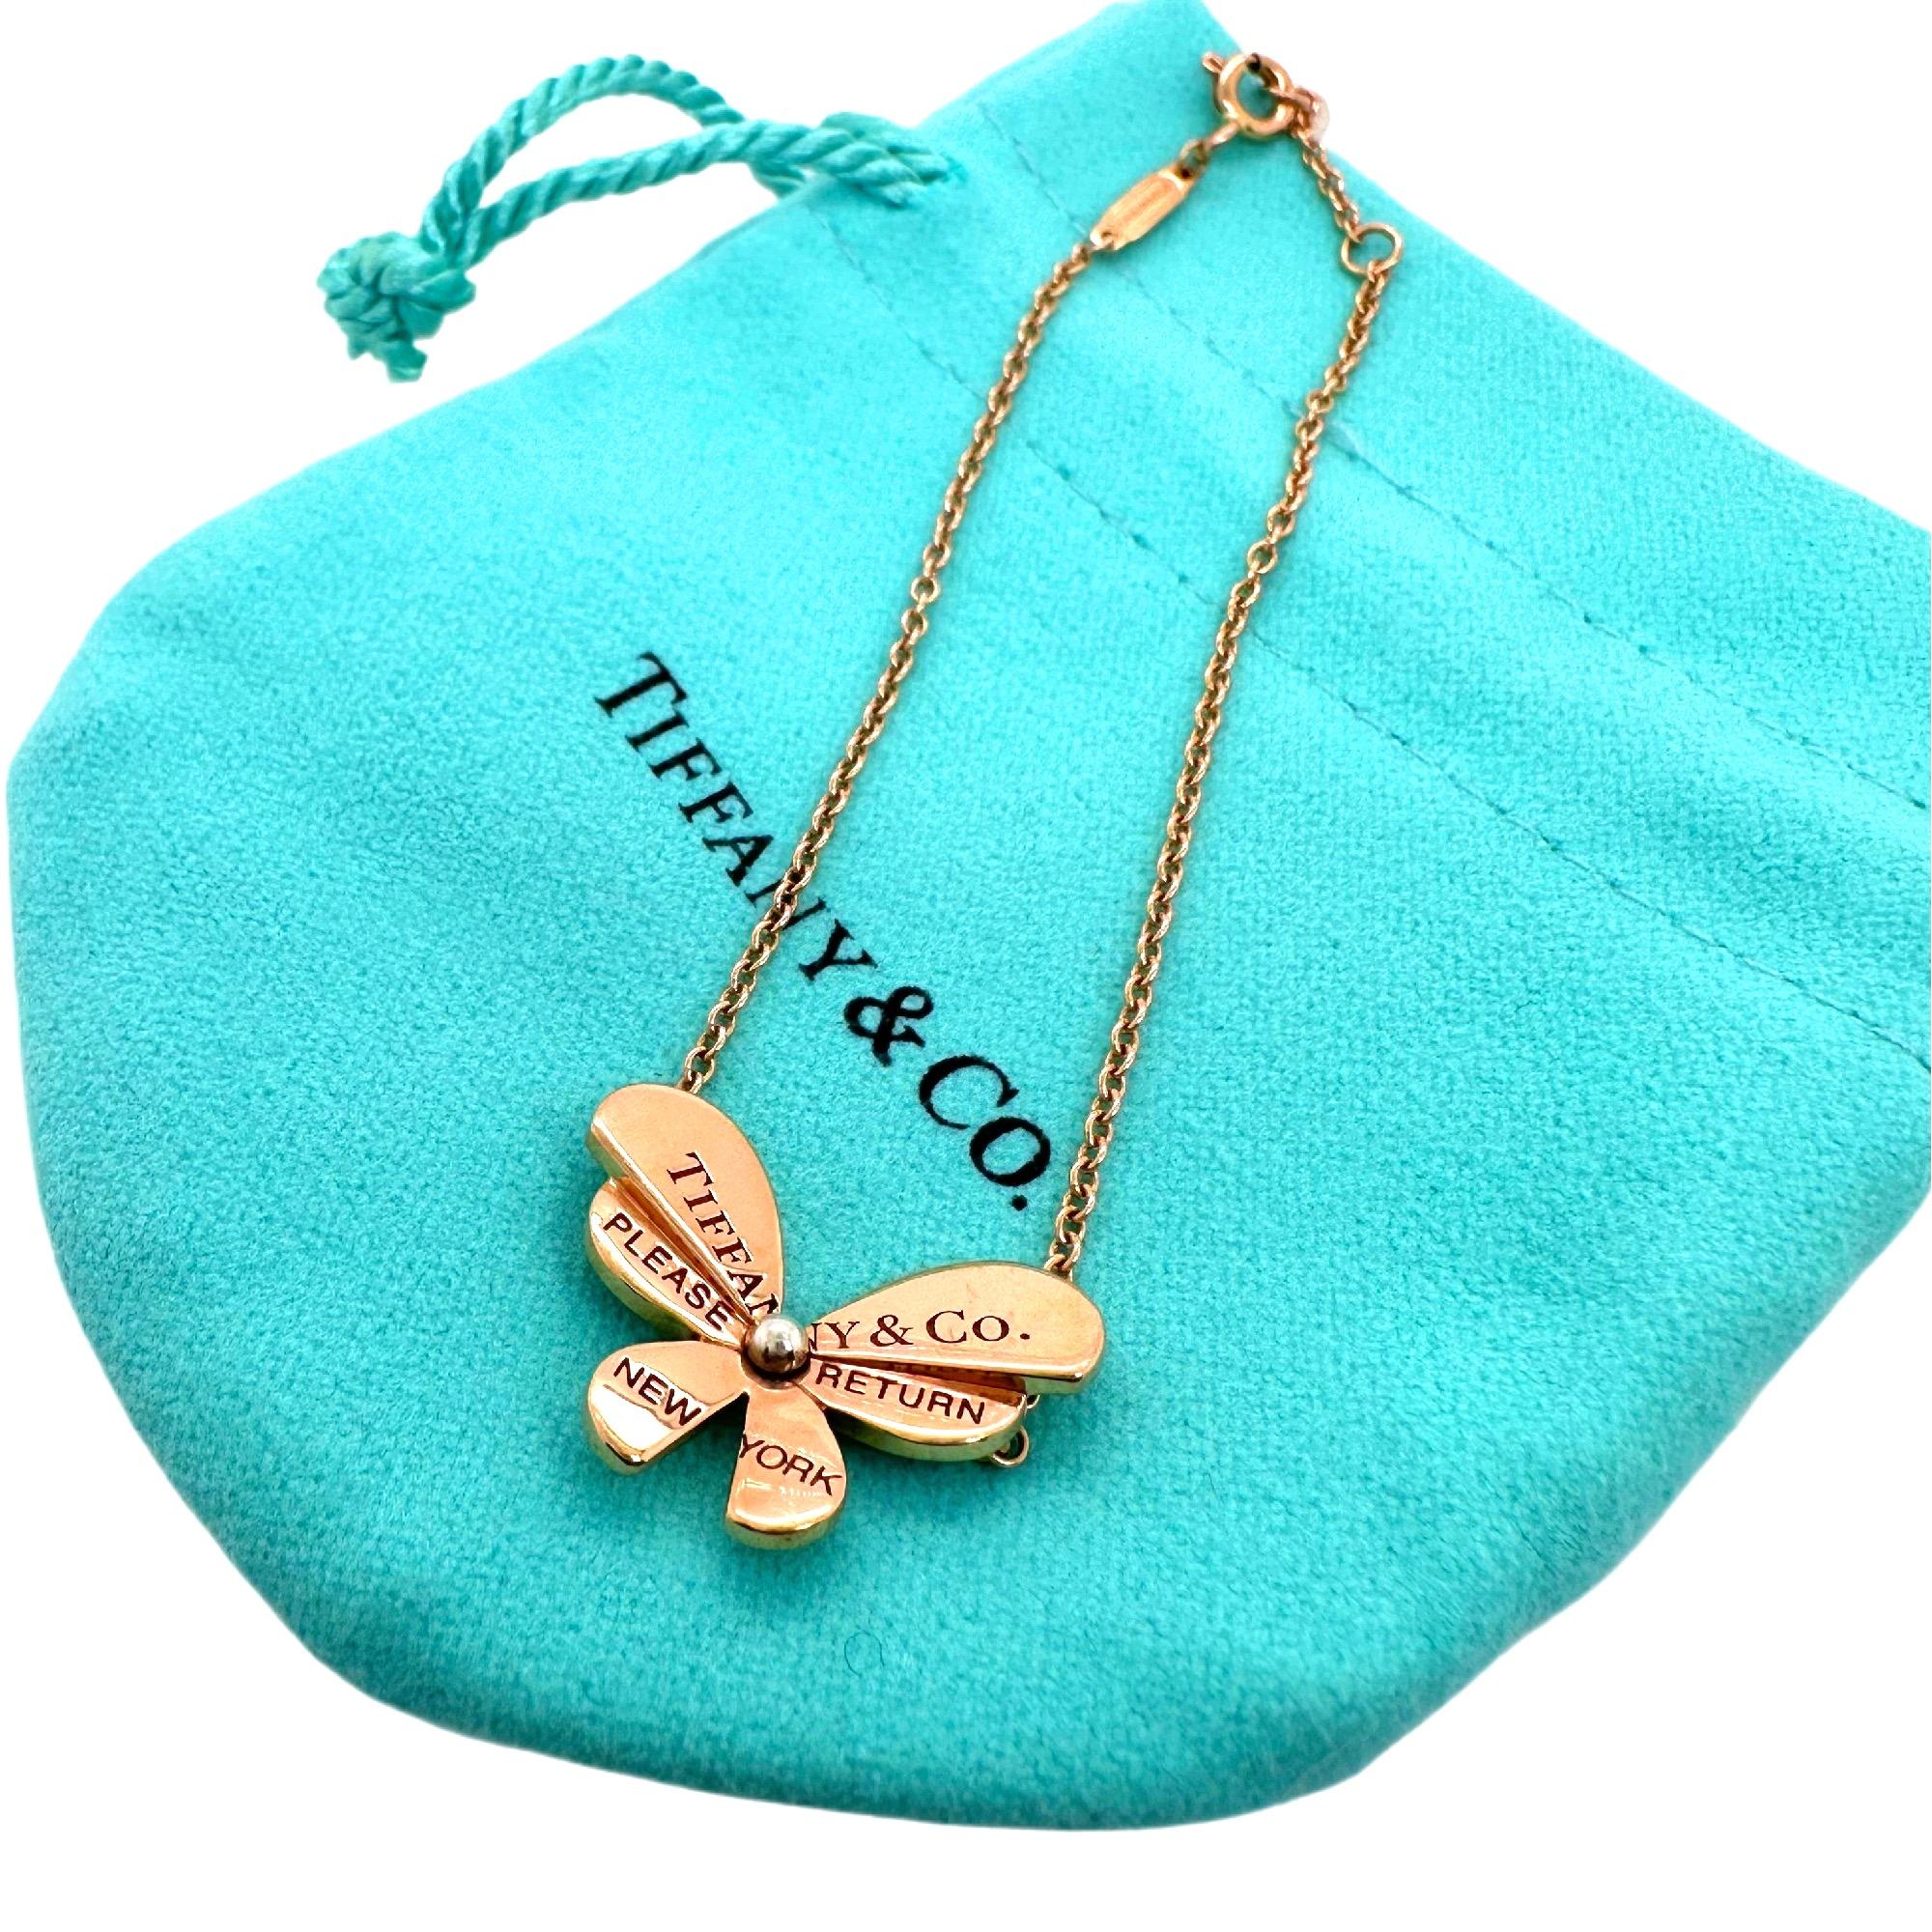 Tiffany & Co Return to Tiffany Love Bug Collection
Style:  Charm Bracelet
Ref. number:  67071611
Metal:  18k Rose Gold & Sterling Silver
Design:  Butterfly with 